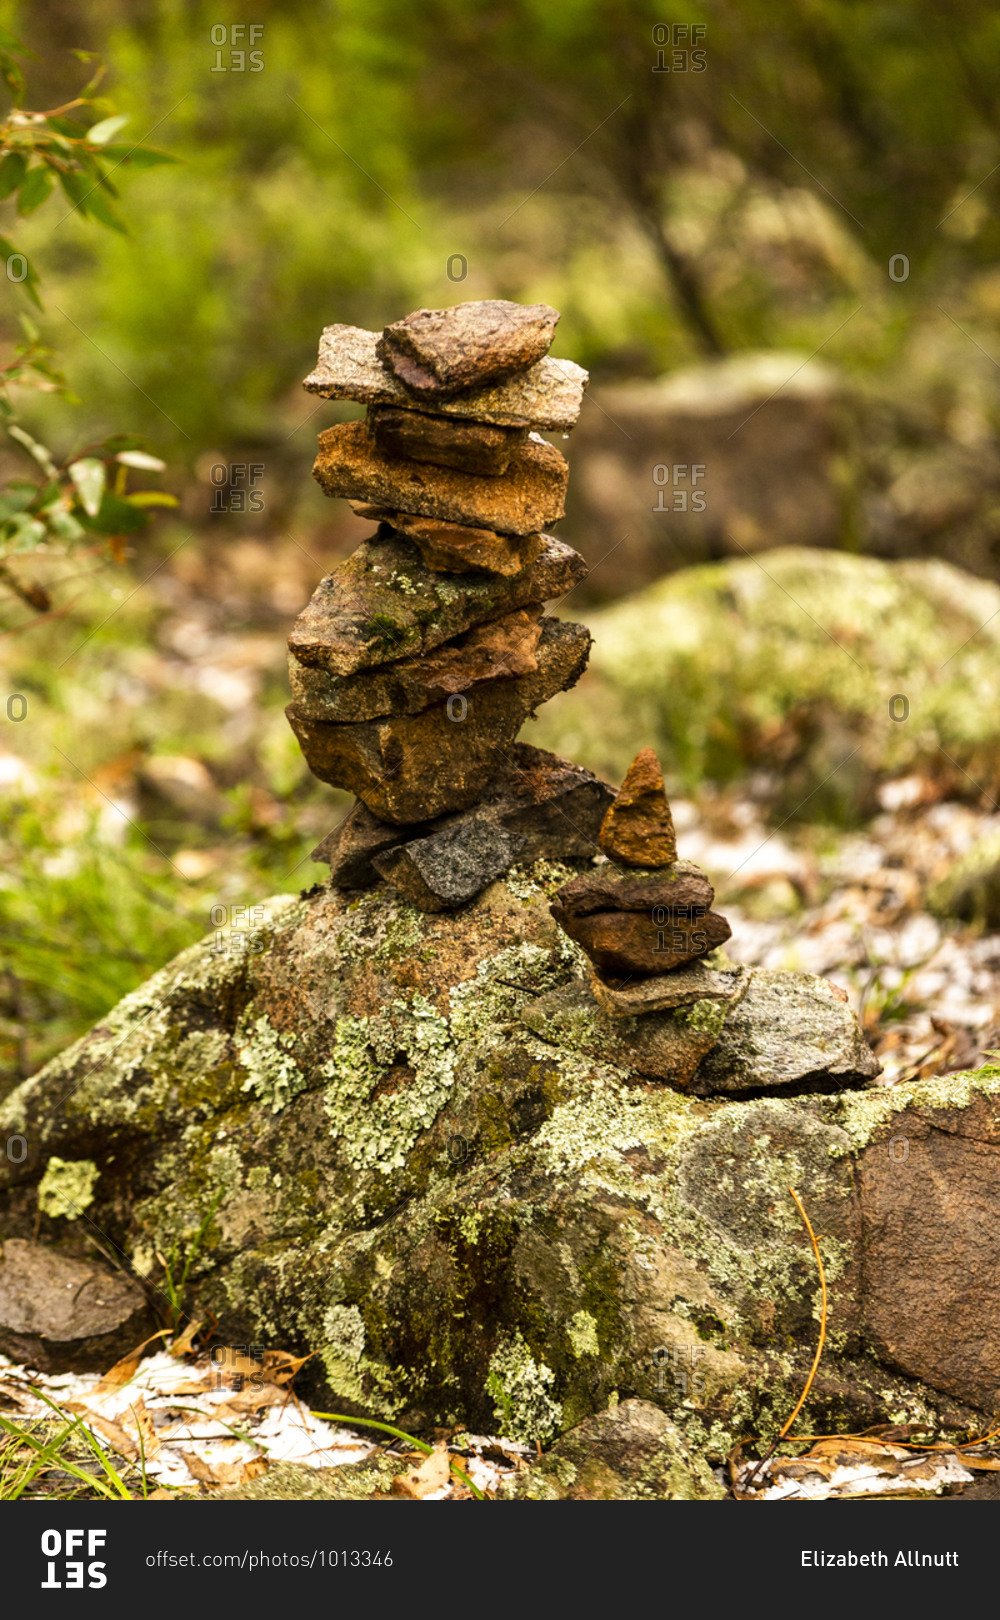 Stacked stone cairn with moss covered rocks stock photo -
OFFSET